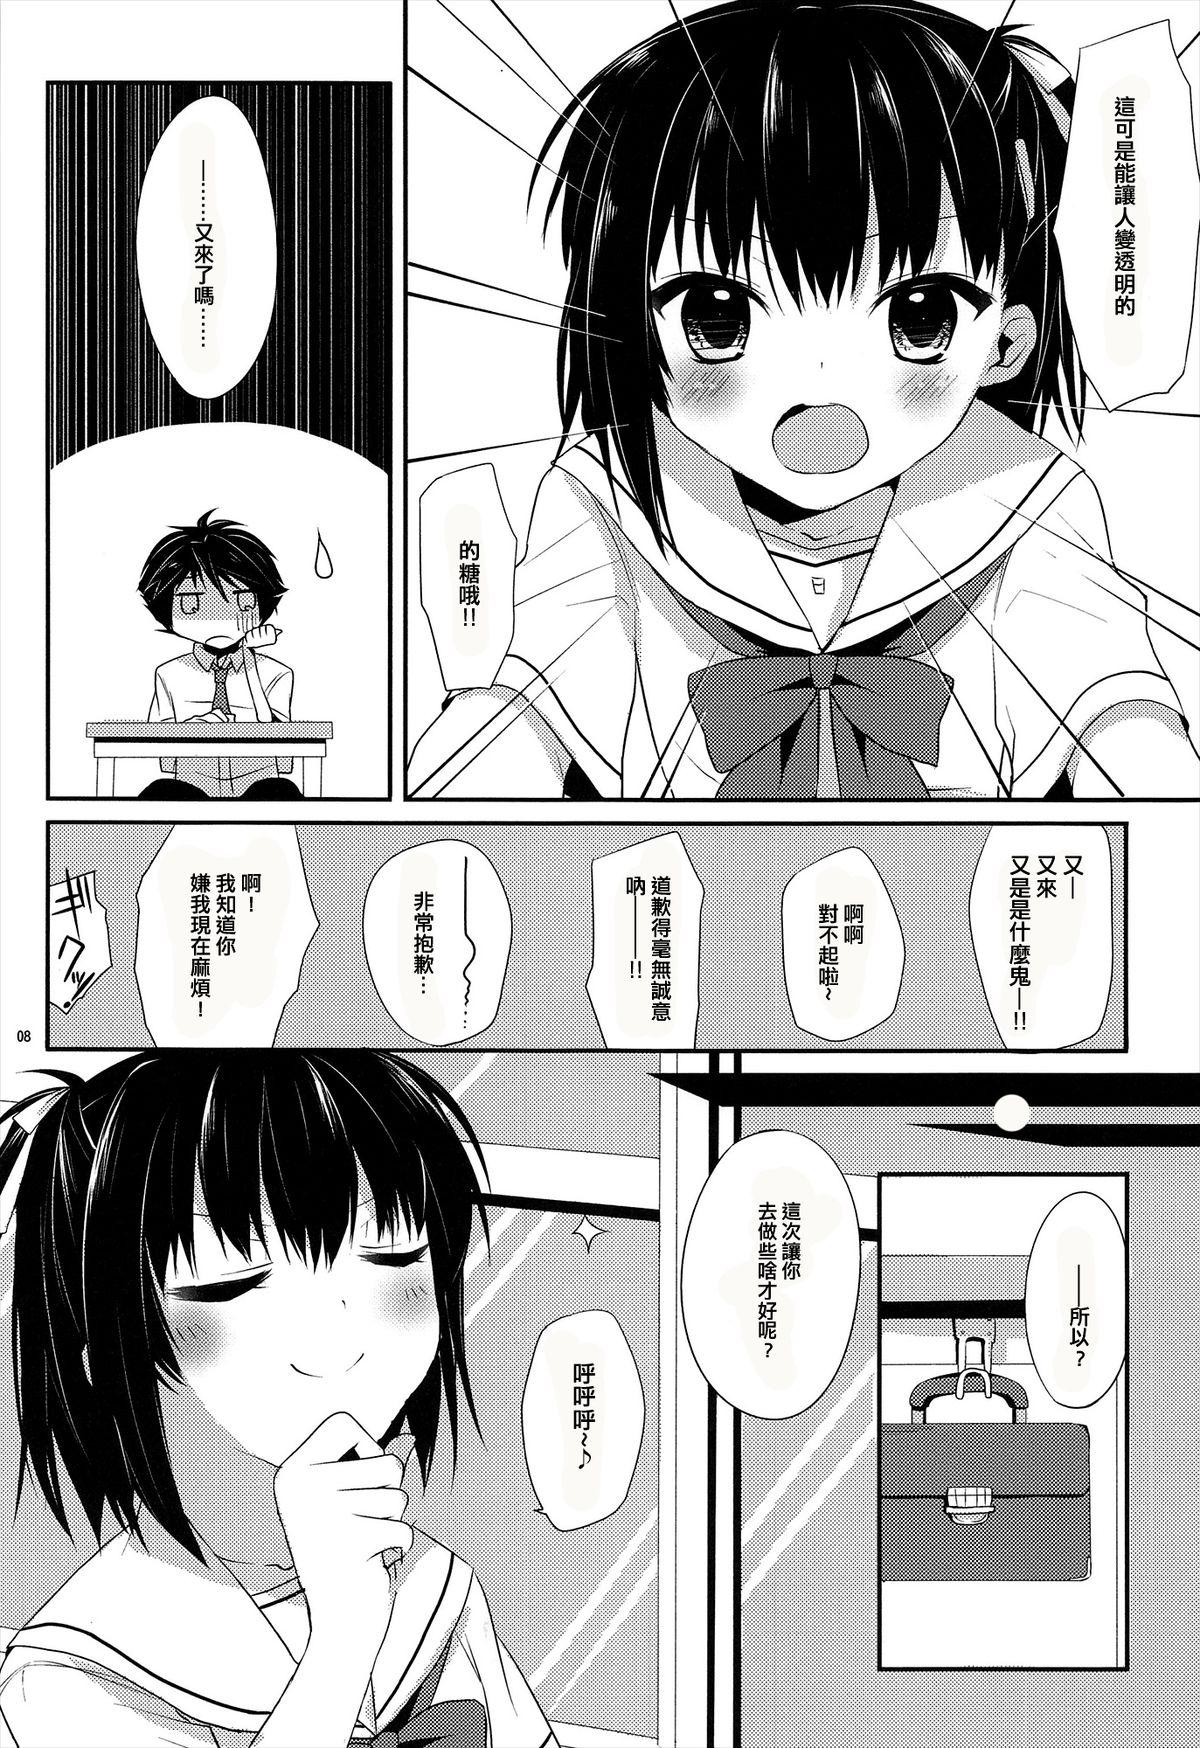 Pussy Lick Ameiro Trap - Prunus girl Amateur Porn - Page 8